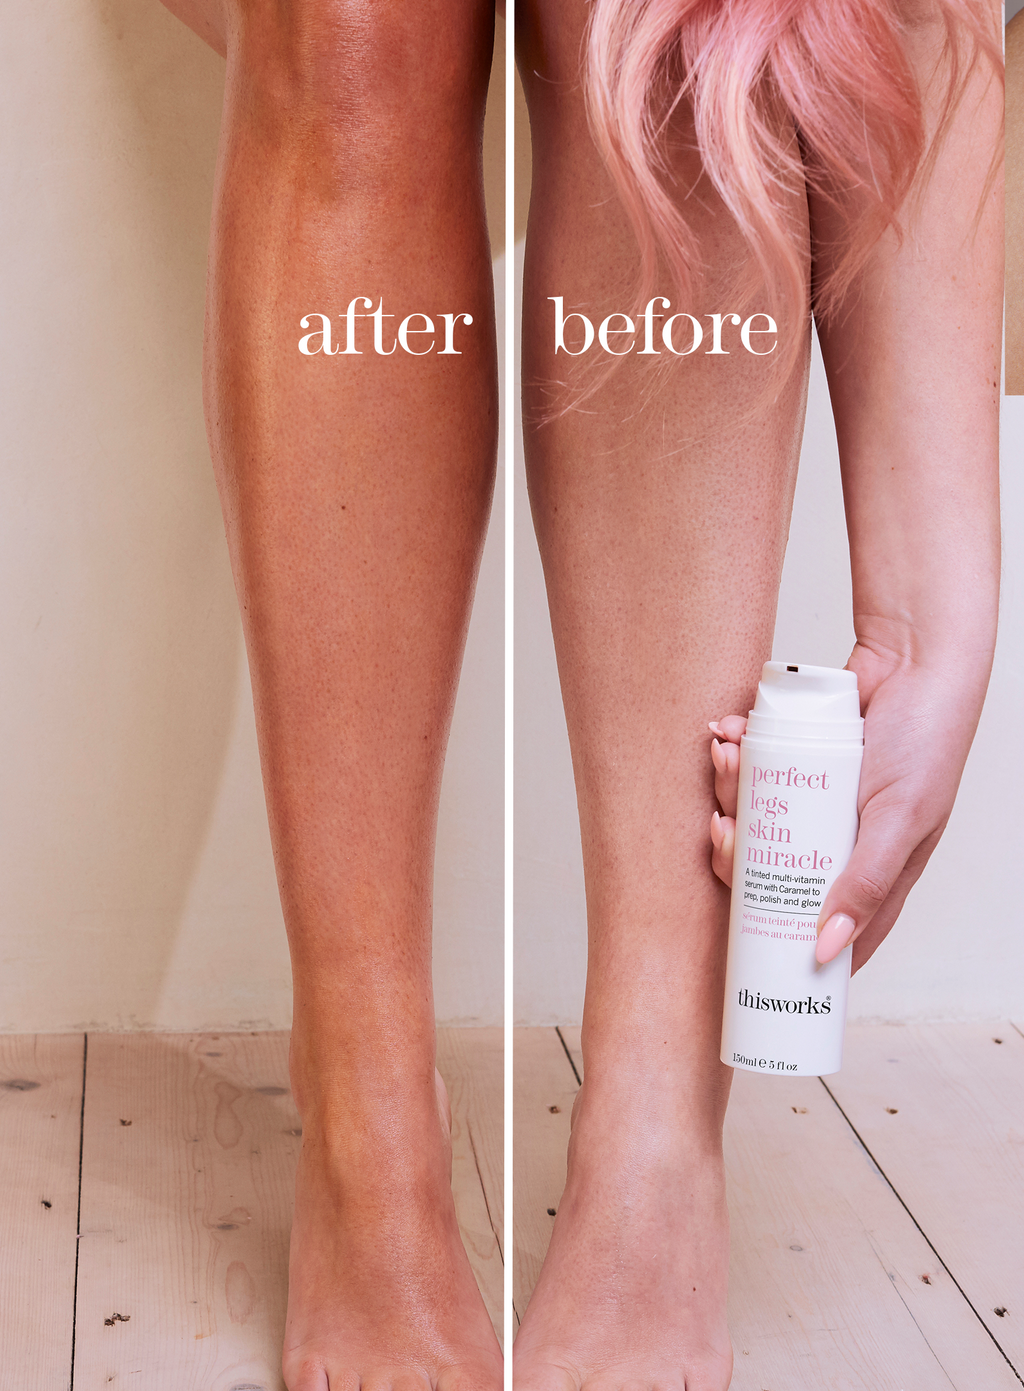 bodycare heroes, bodycare, tan, instant tan, perfect legs skin miracle